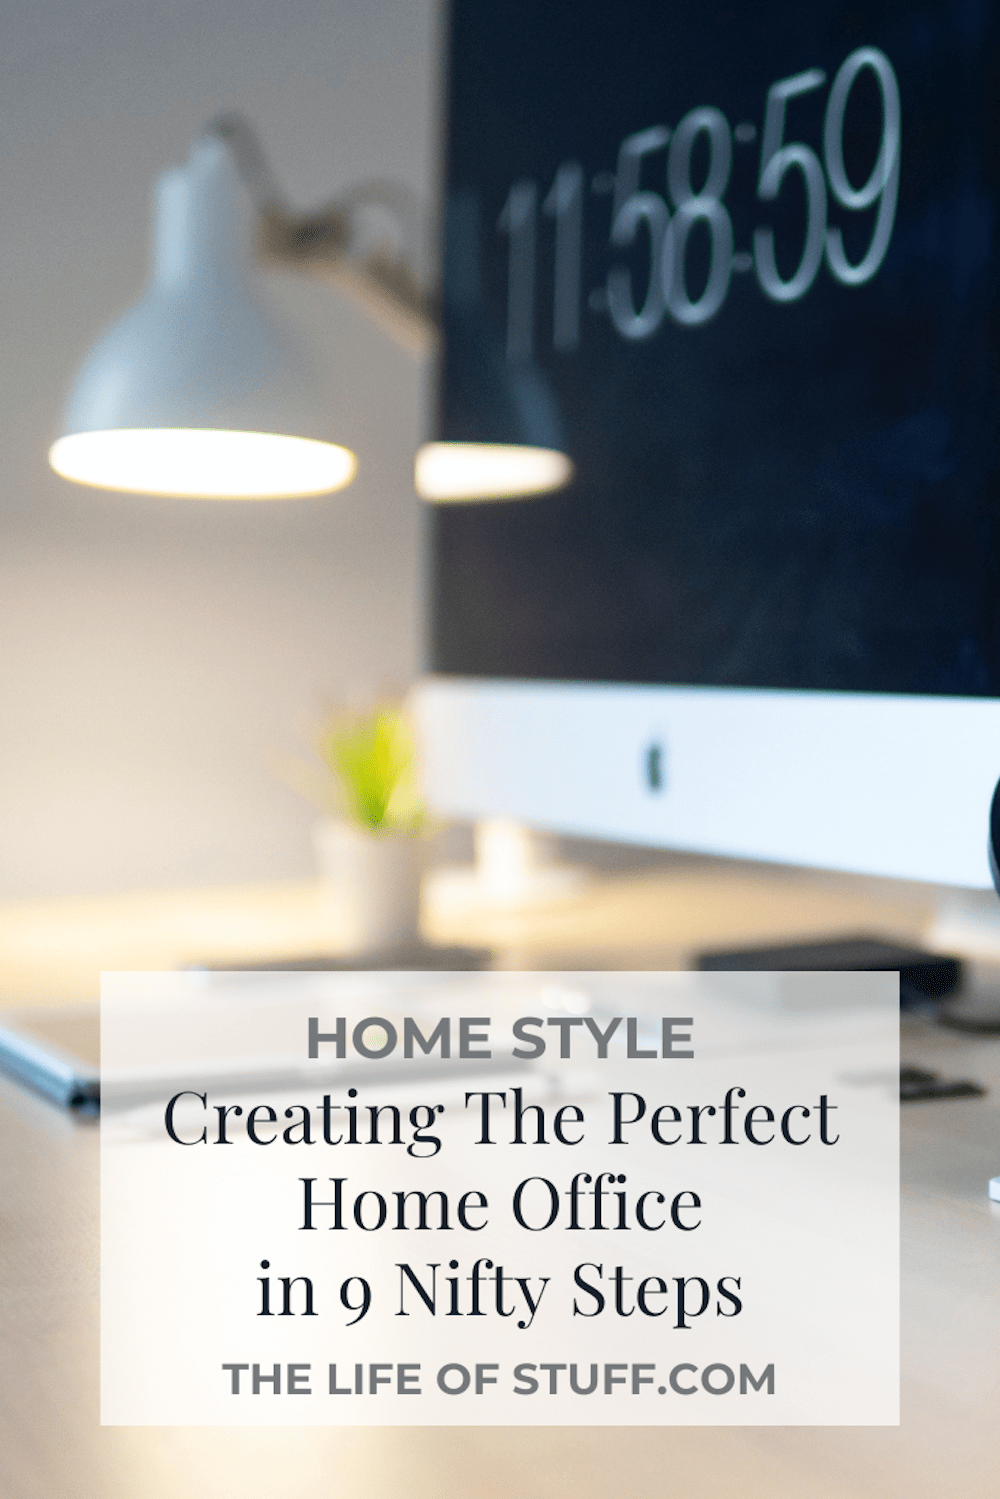 Creating The Perfect Home Office - in 9 Nifty Steps - Experiment What Works